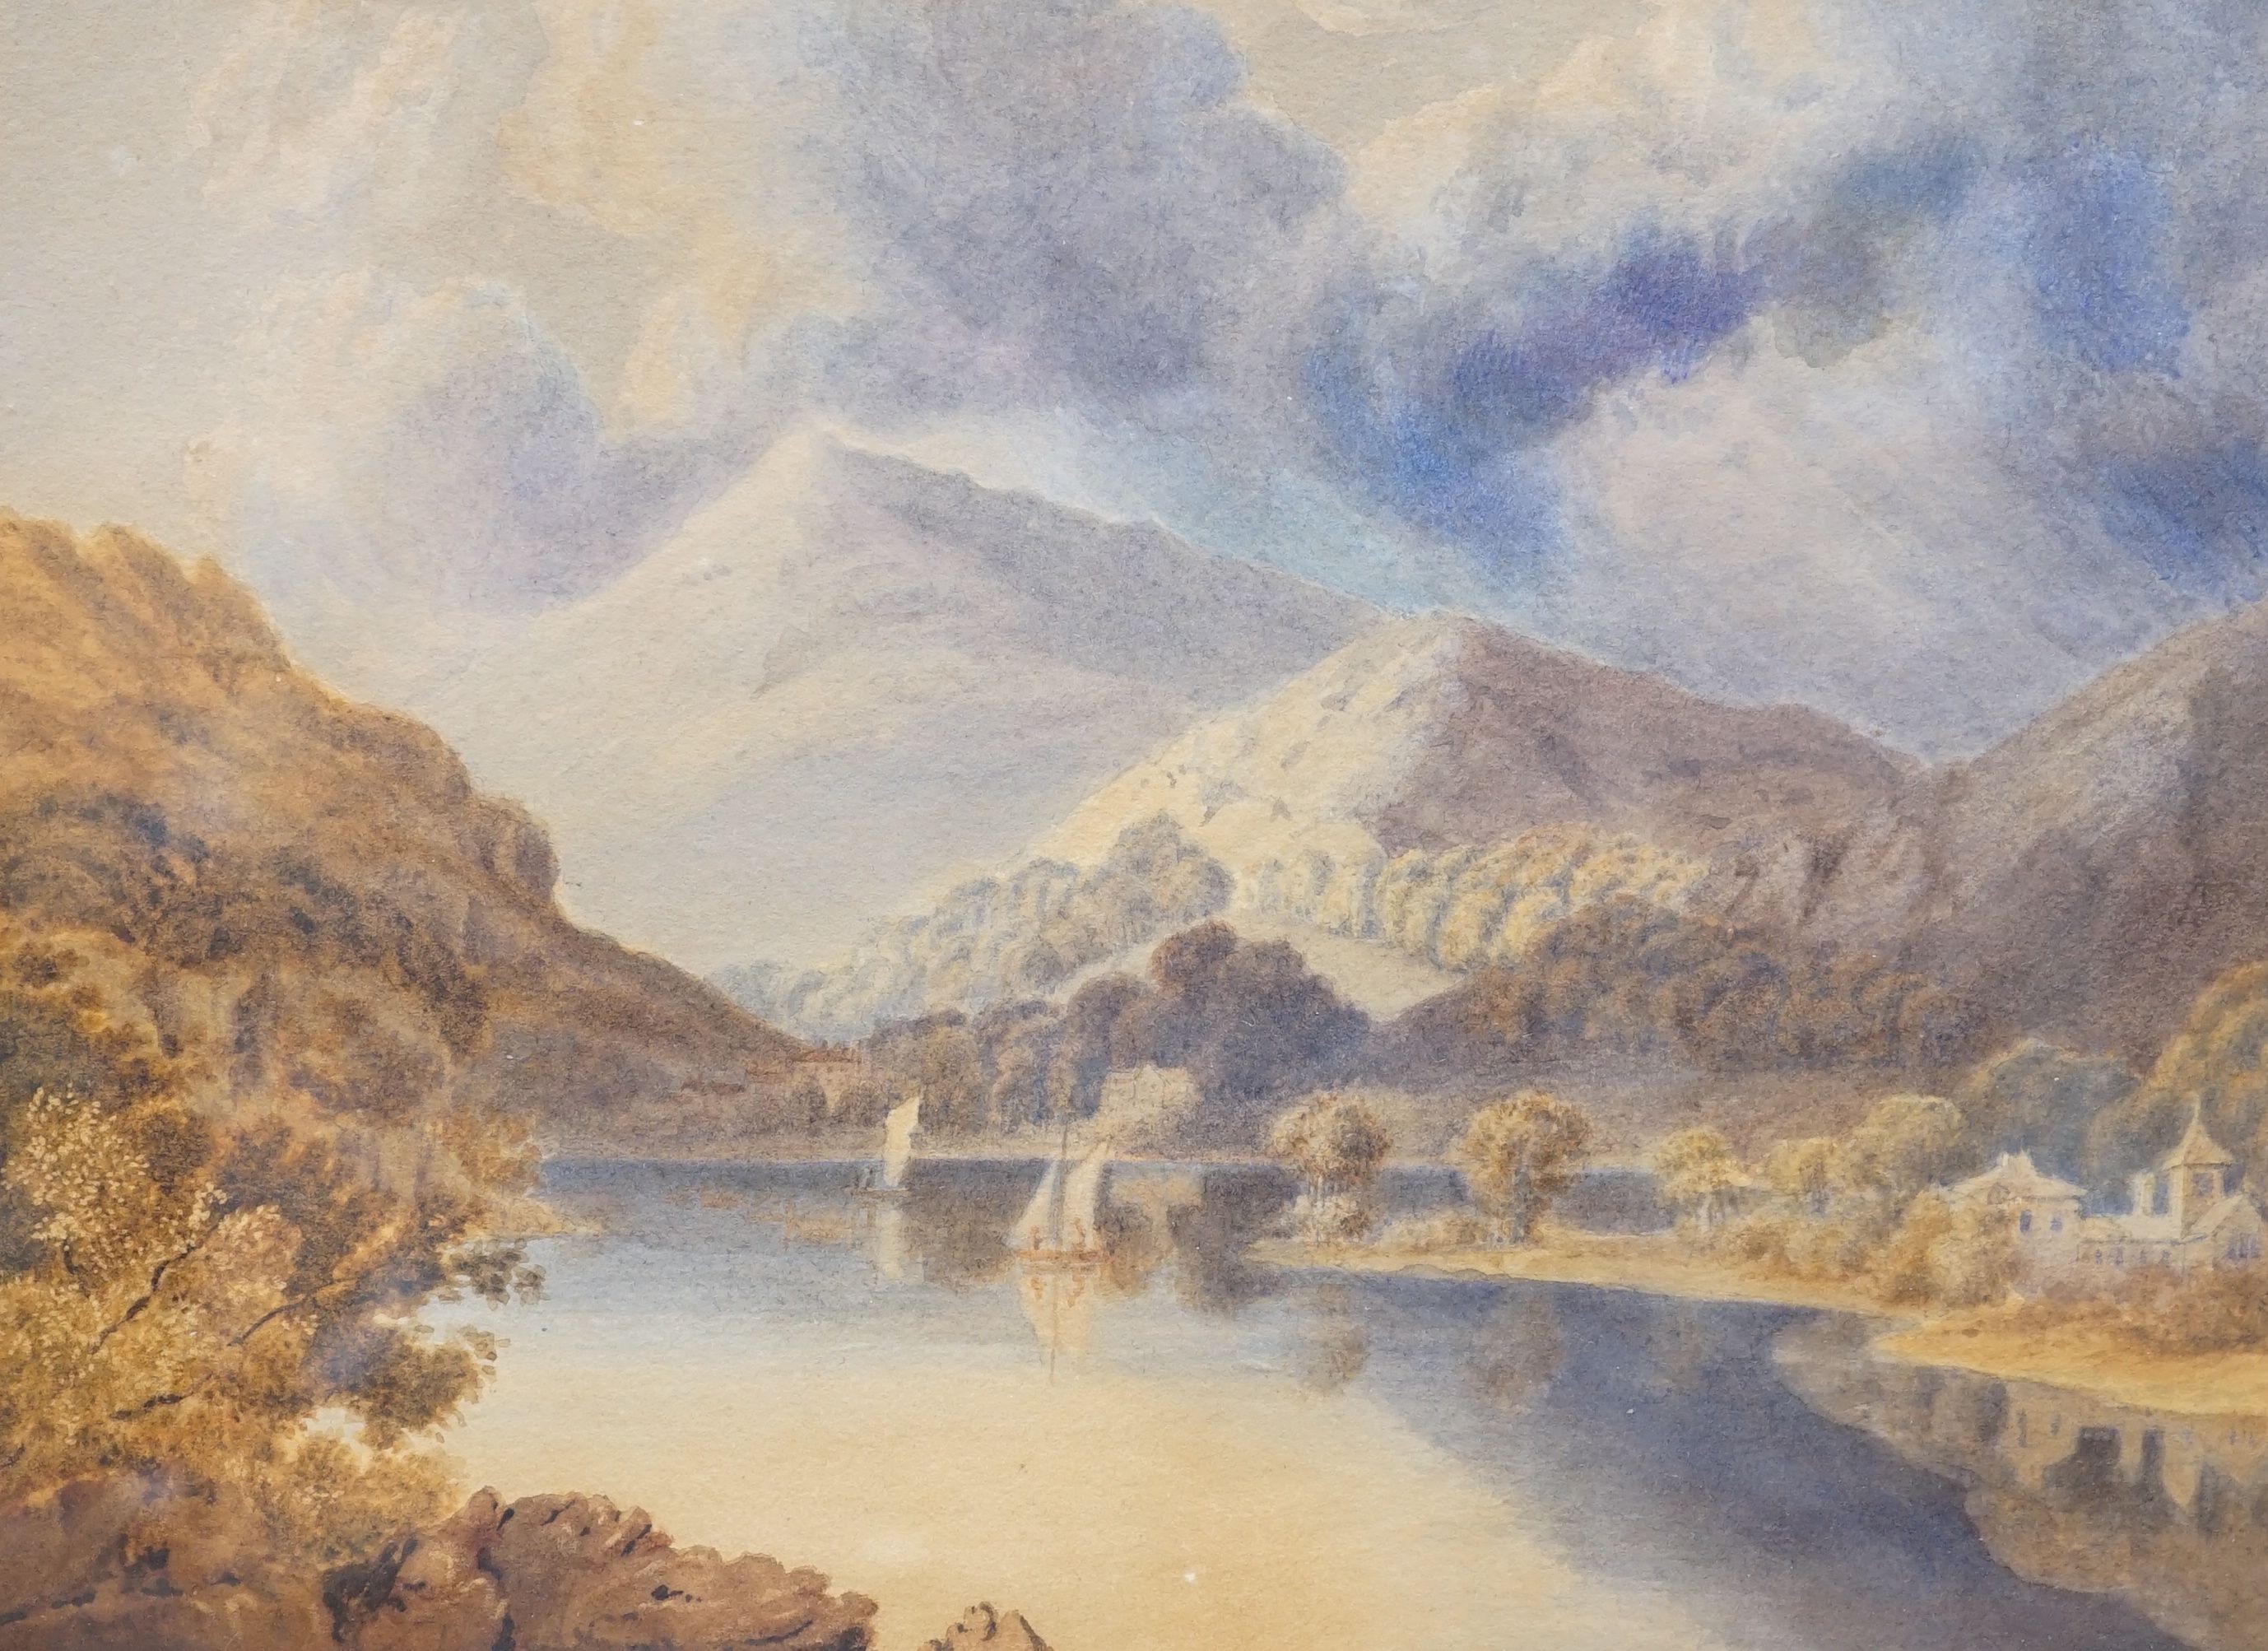 Attributed to George Fennel Robson (1788-1833), Lakeland view with small sailing boatspen and